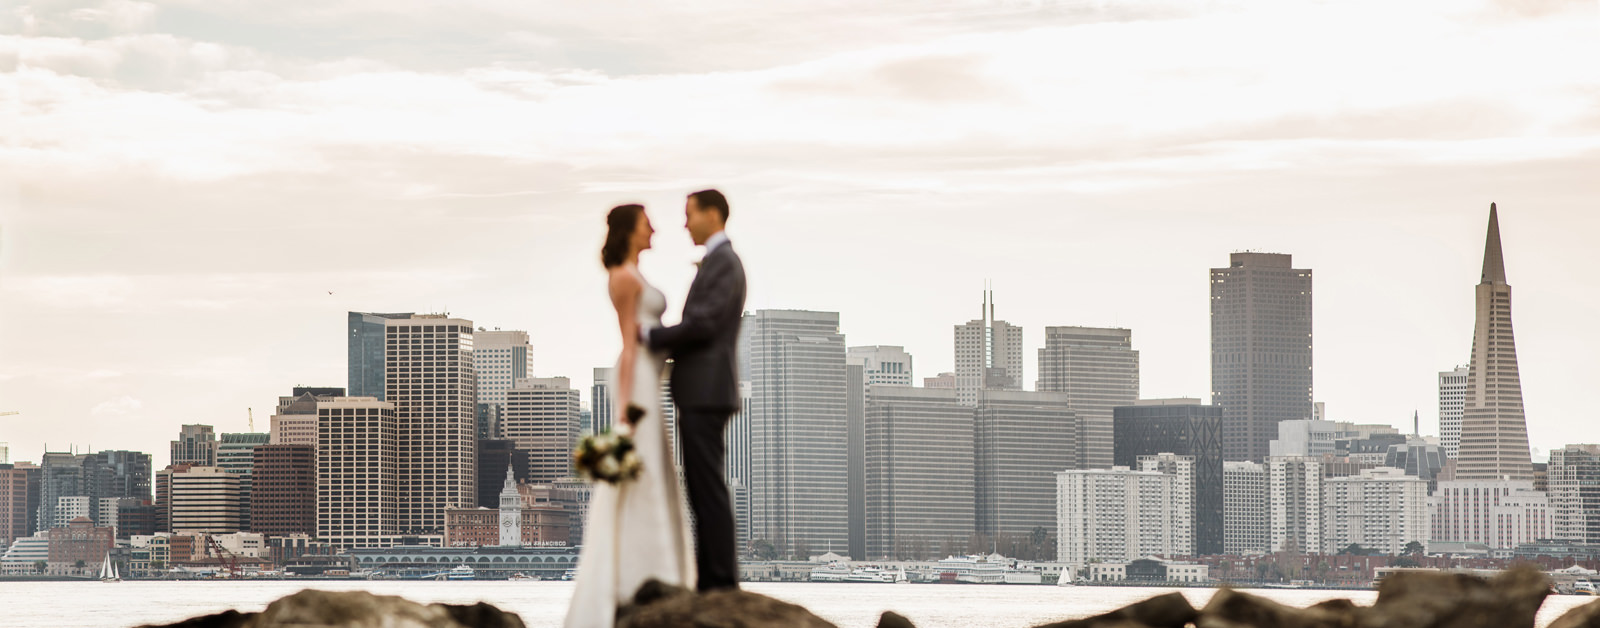 040-panoramic-portrait-of-a-bride-and-groom-overlooking-san-francisco-by-san-francisco-wedding-photographer.jpg